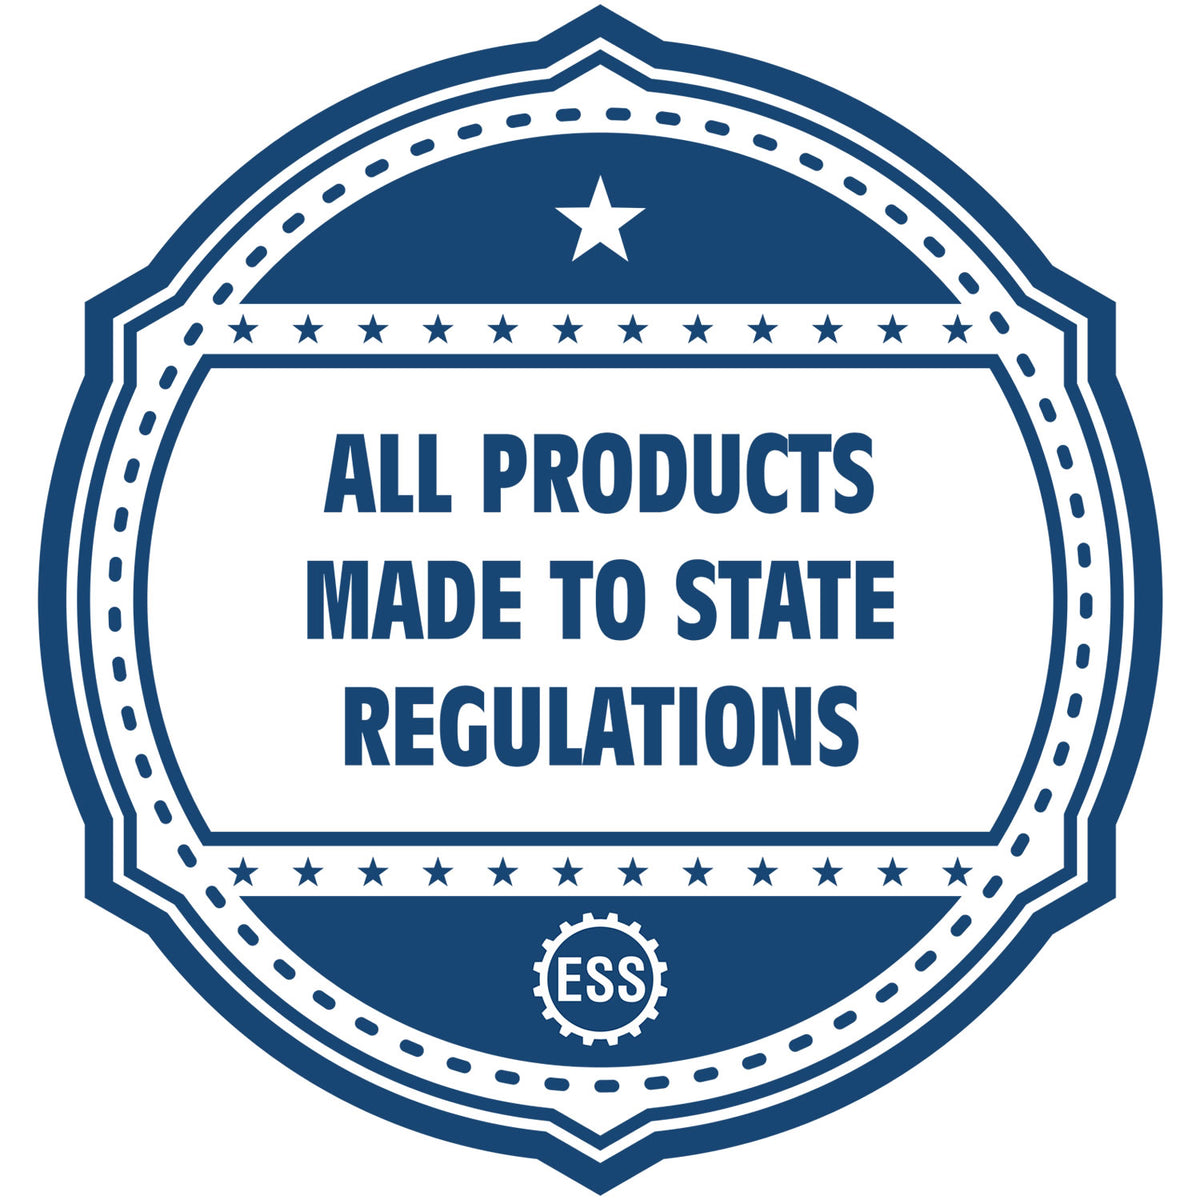 An icon or badge element for the Digital Wyoming Landscape Architect Stamp showing that this product is made in compliance with state regulations.